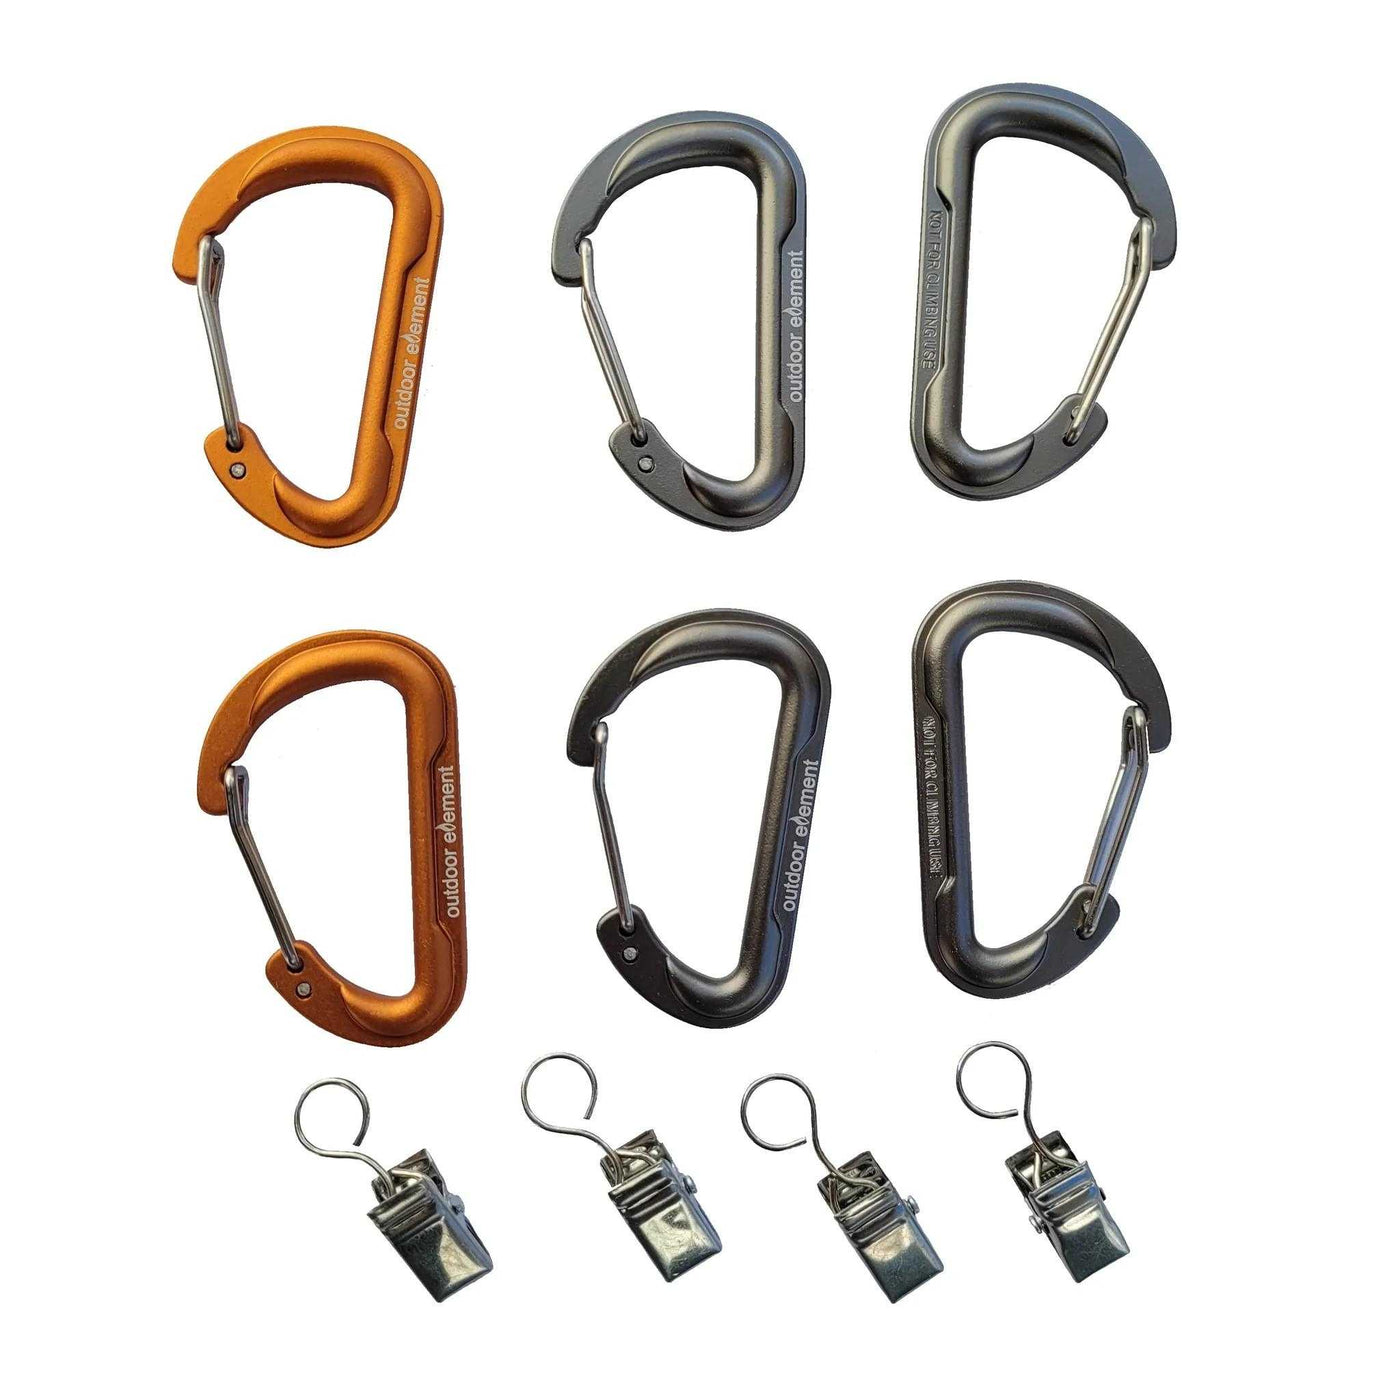 Outdoor Element Gearbiner Clip Set  Outdoor Gear and Accessories NZ –  Further Faster